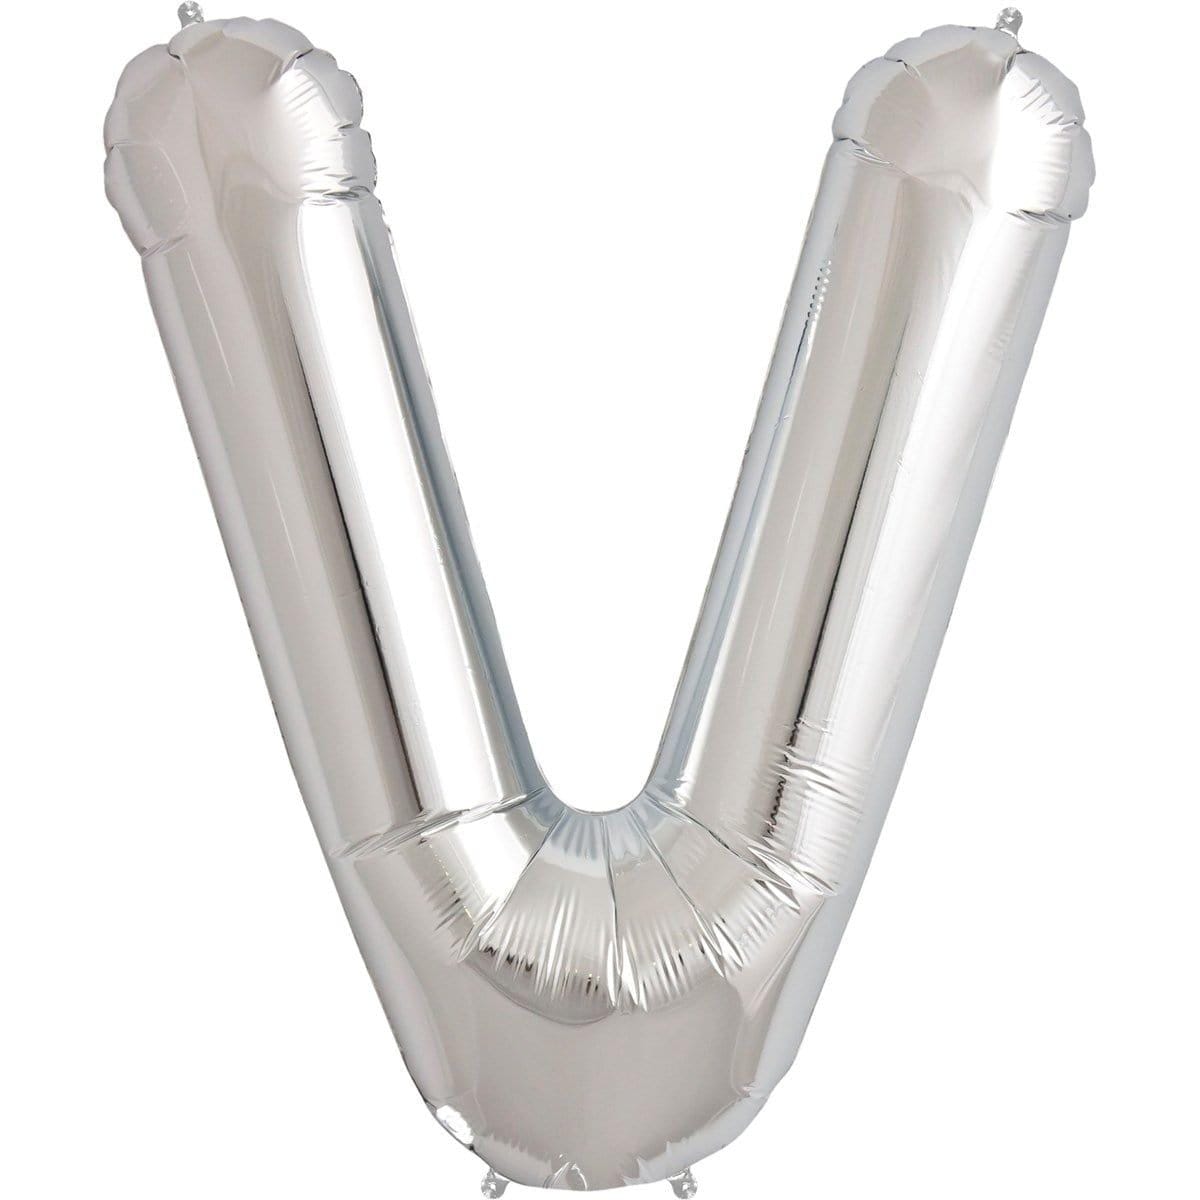 Buy Balloons Silver Letter V Foil Balloon, 34 Inches sold at Party Expert